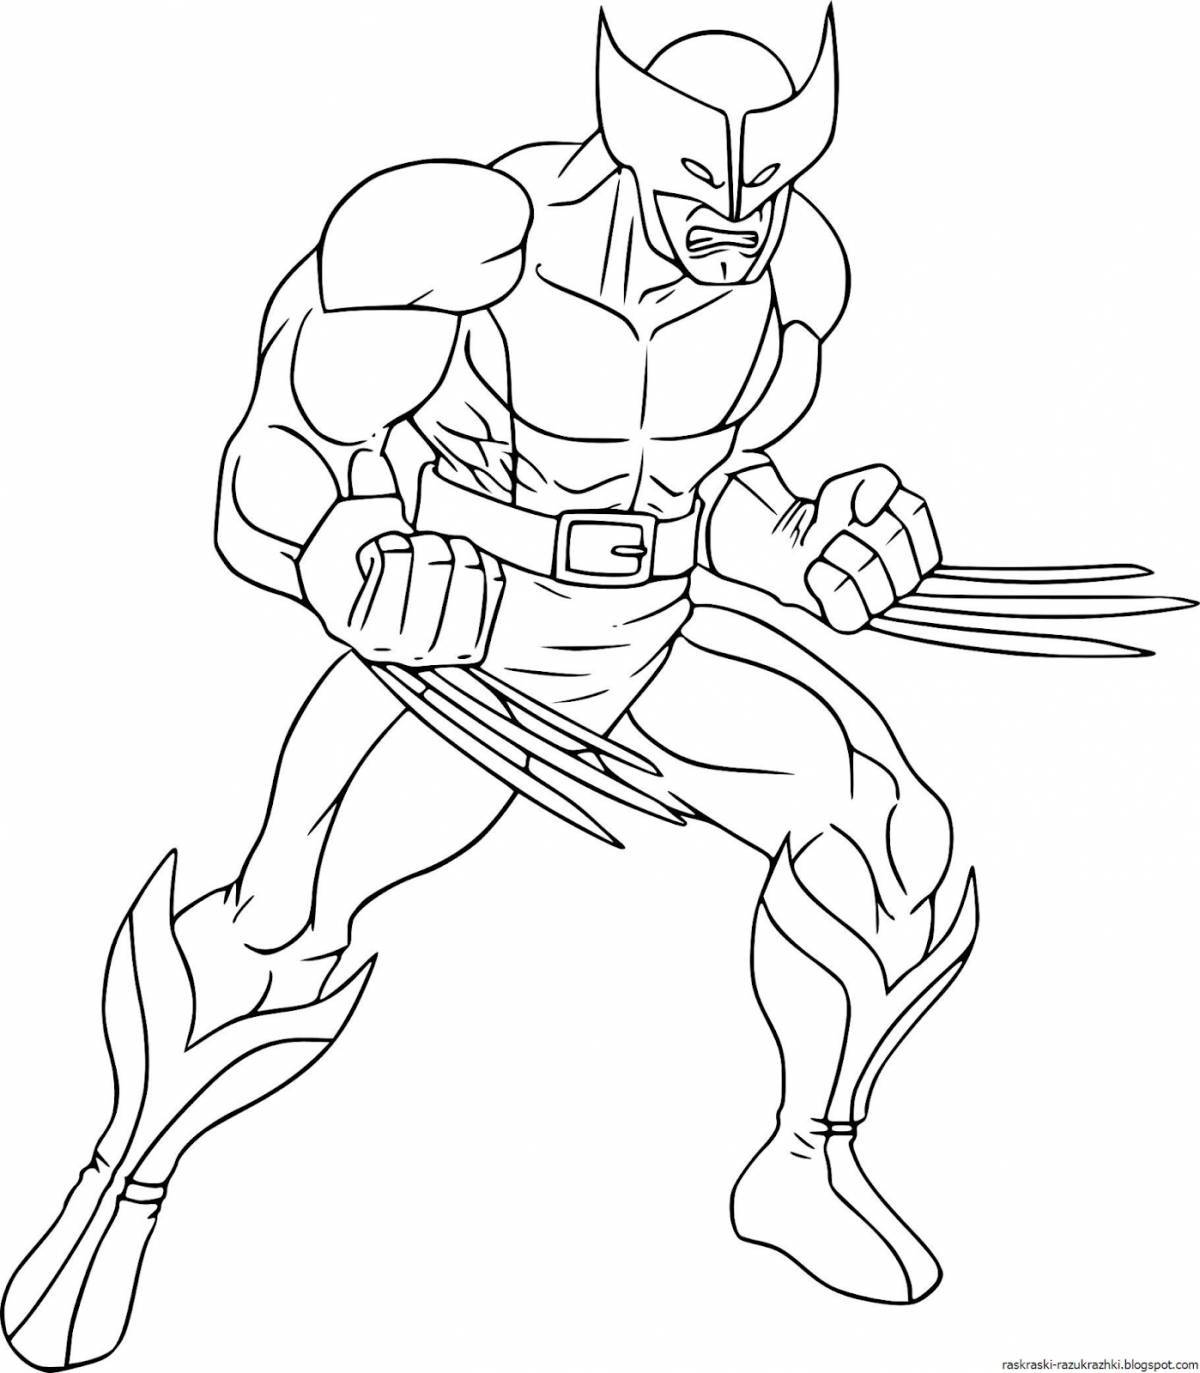 Cool superhero coloring pages for boys